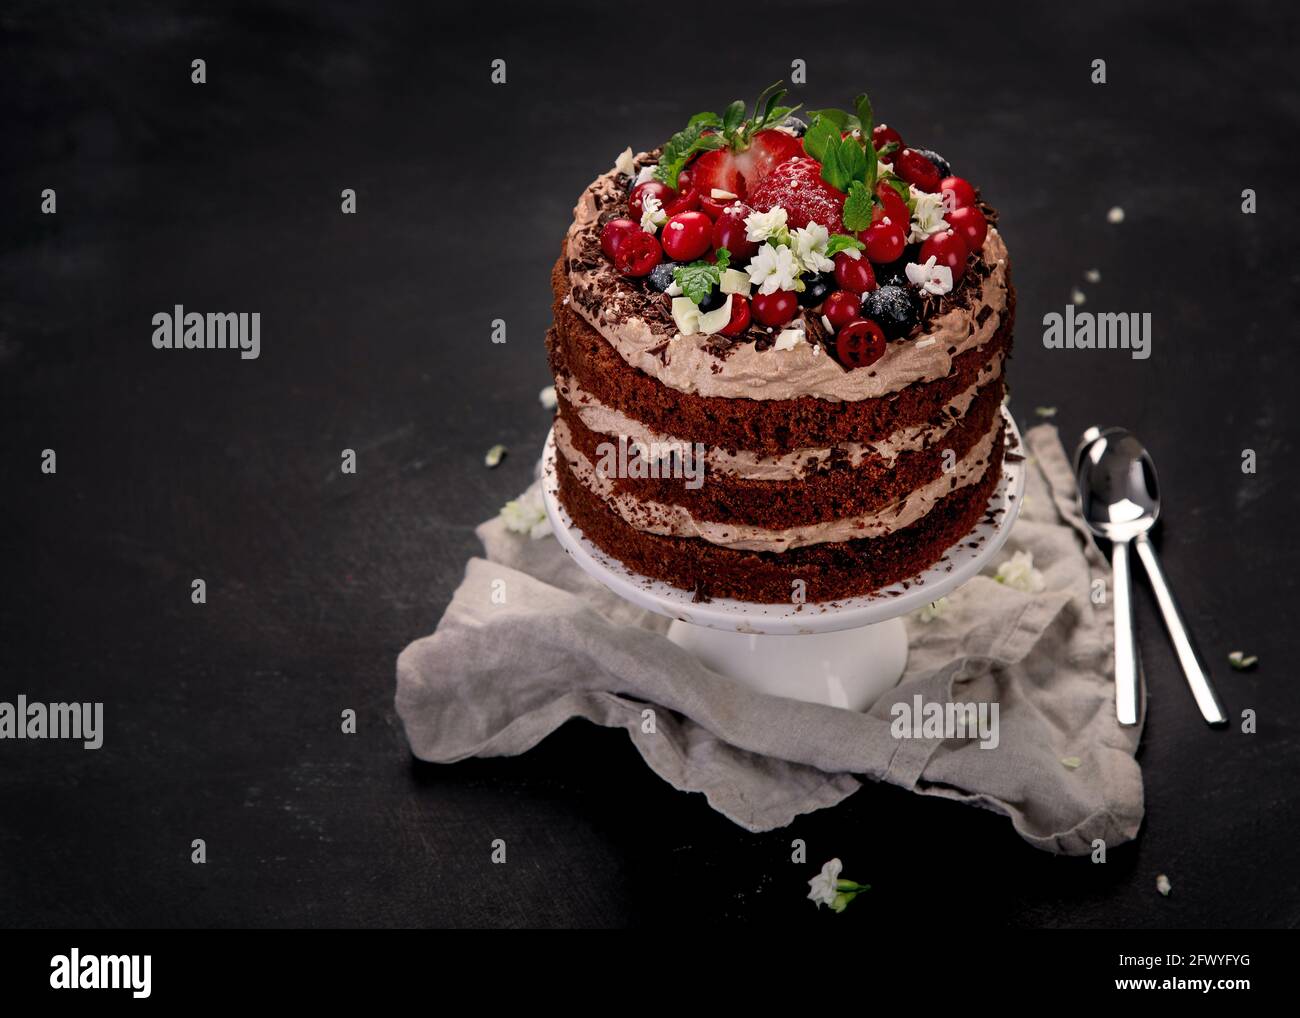 Delicious homemade chocolate cake with fresh berries and mascarpone cream on dark background. copy space Stock Photo